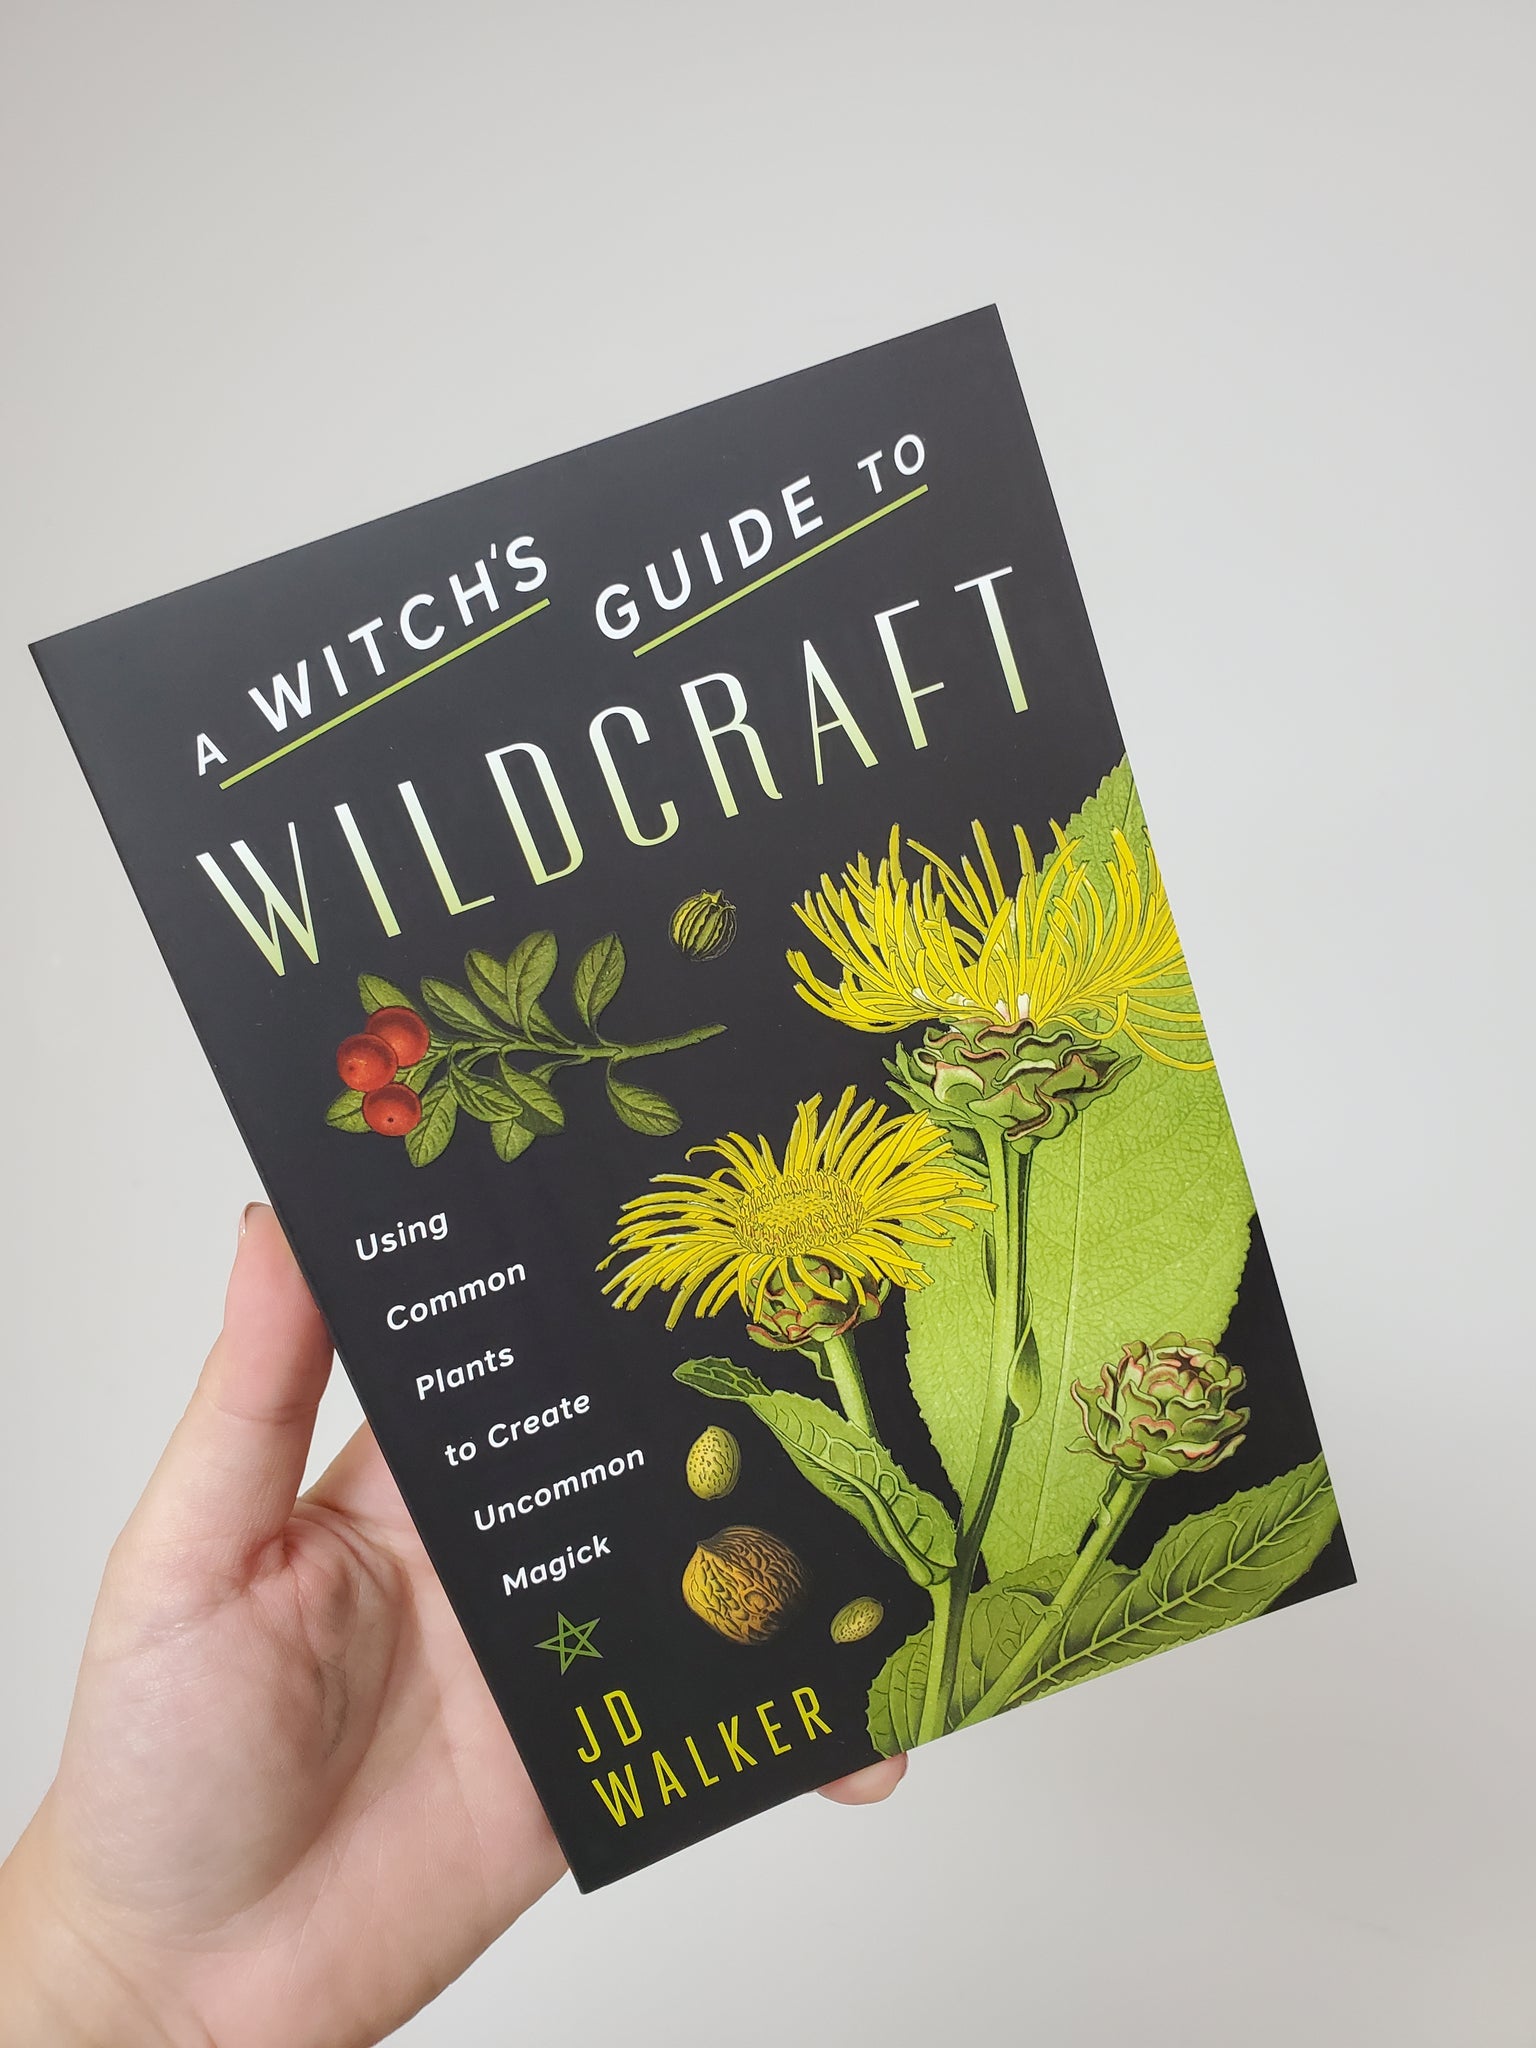 Witch's Guide to Wildcraft - Using Common Plants to Create Uncommon Magick